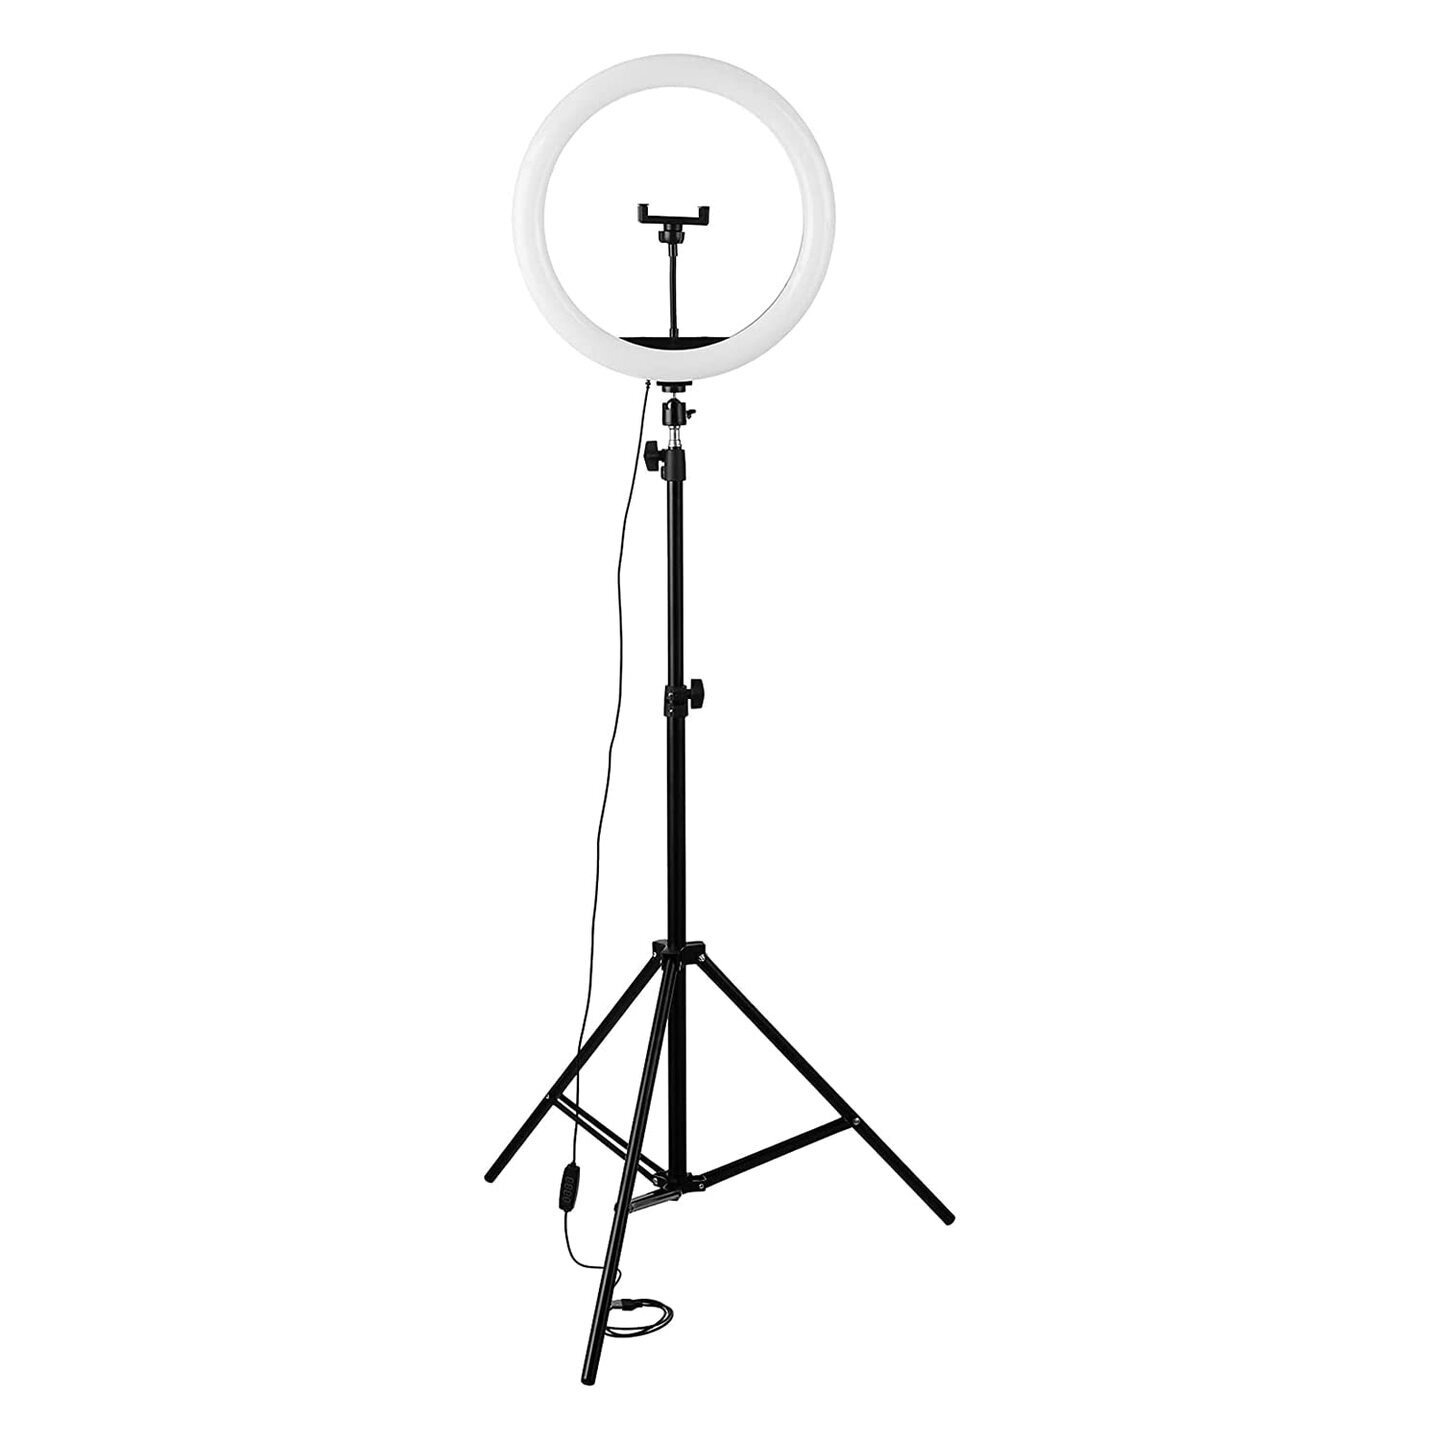 10 inch ring light with height adjustable tripod, mobile holder and 180 degree rotation 7 feet